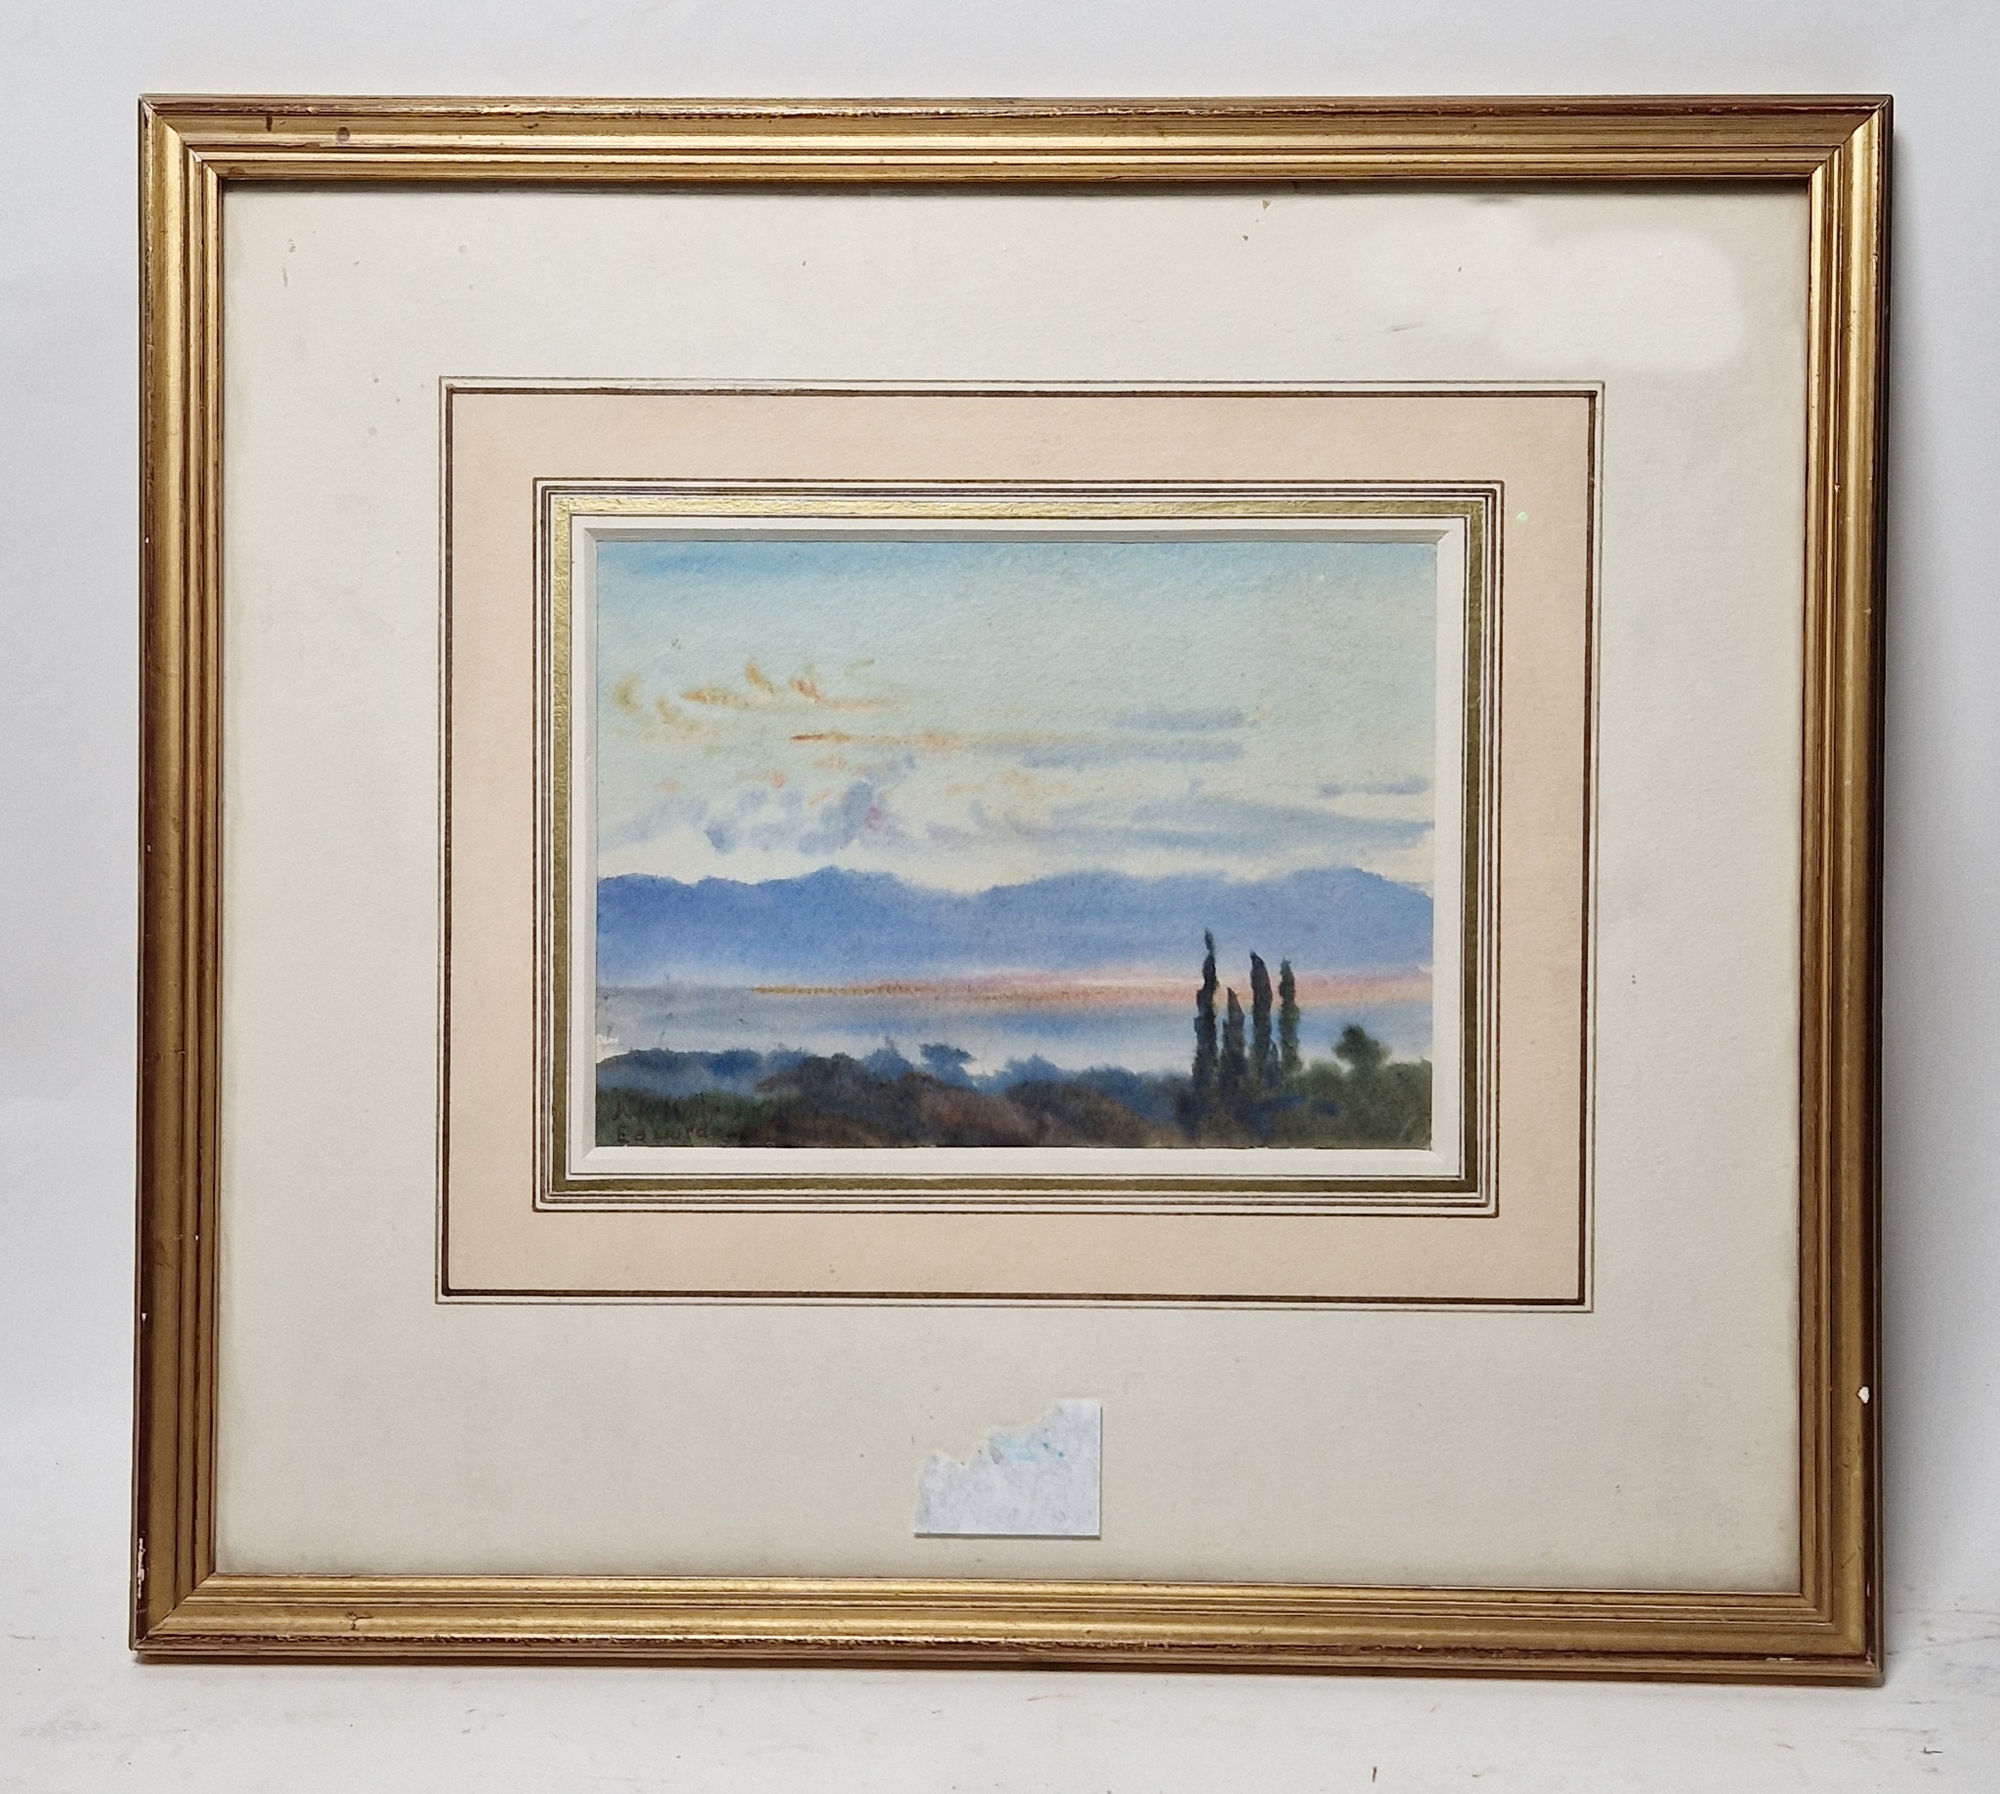 May de Montravel Edwardes (1887-1967) Watercolour on paper Landscape at dusk on the Riviera, - Image 2 of 3